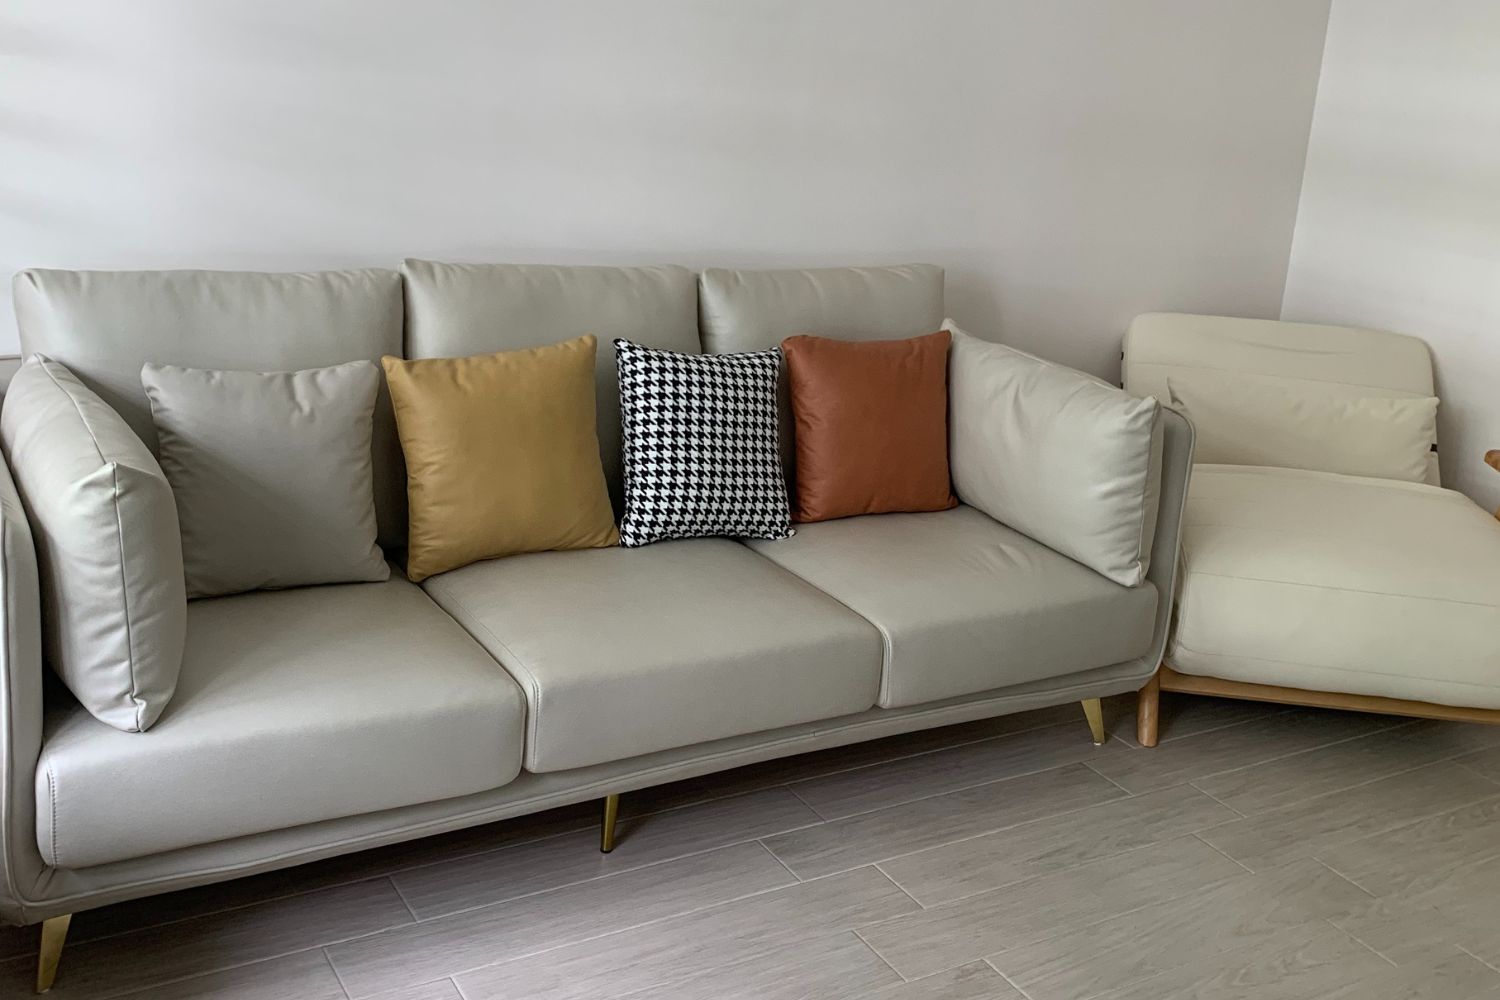 Corona 90cm white pet friendly fabric sofa bed and Chris 210cm white leathaire sofa in real customer homes